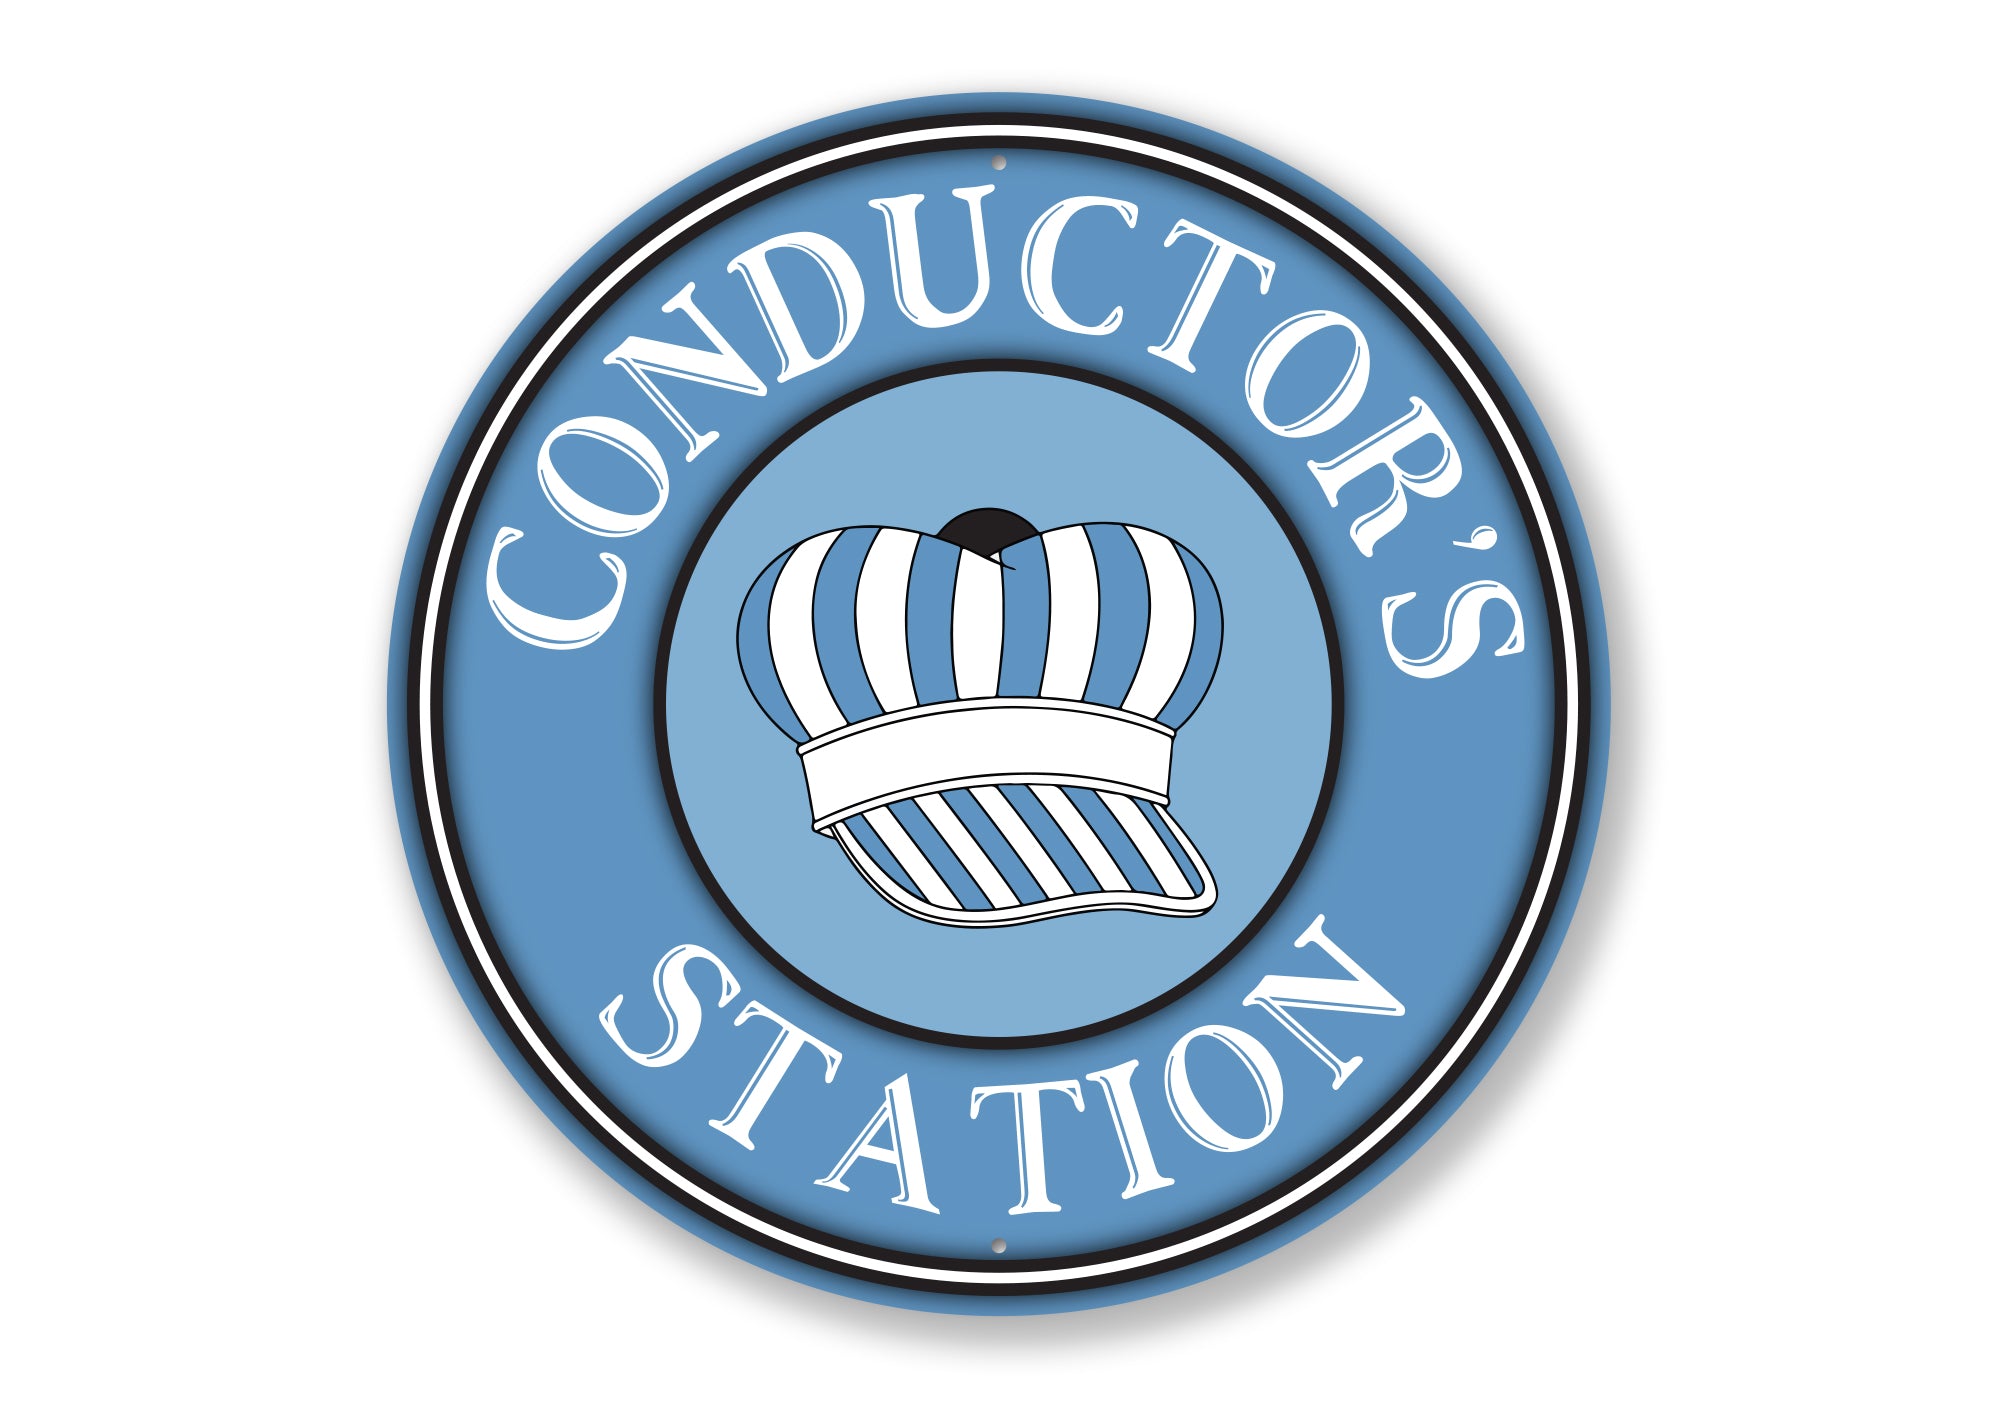 Conductors Station Sign